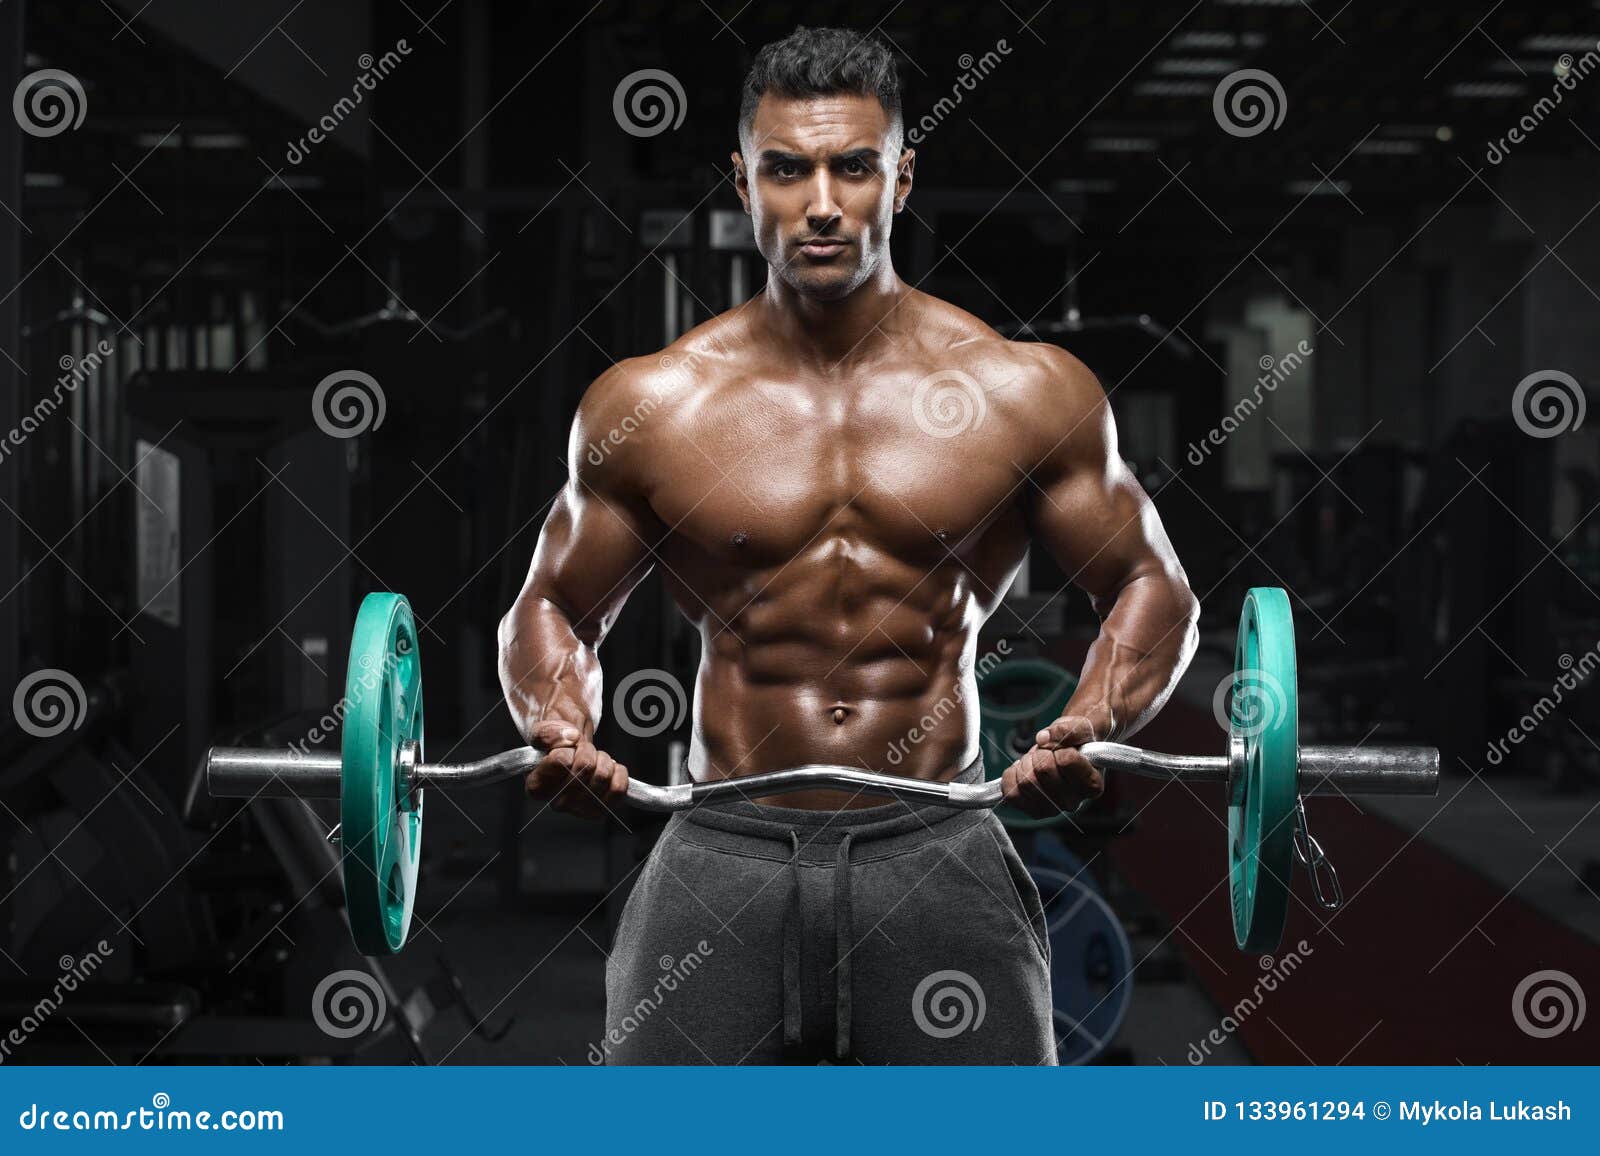 Muscular Man Working Out In Gym Doing Exercises Stock 